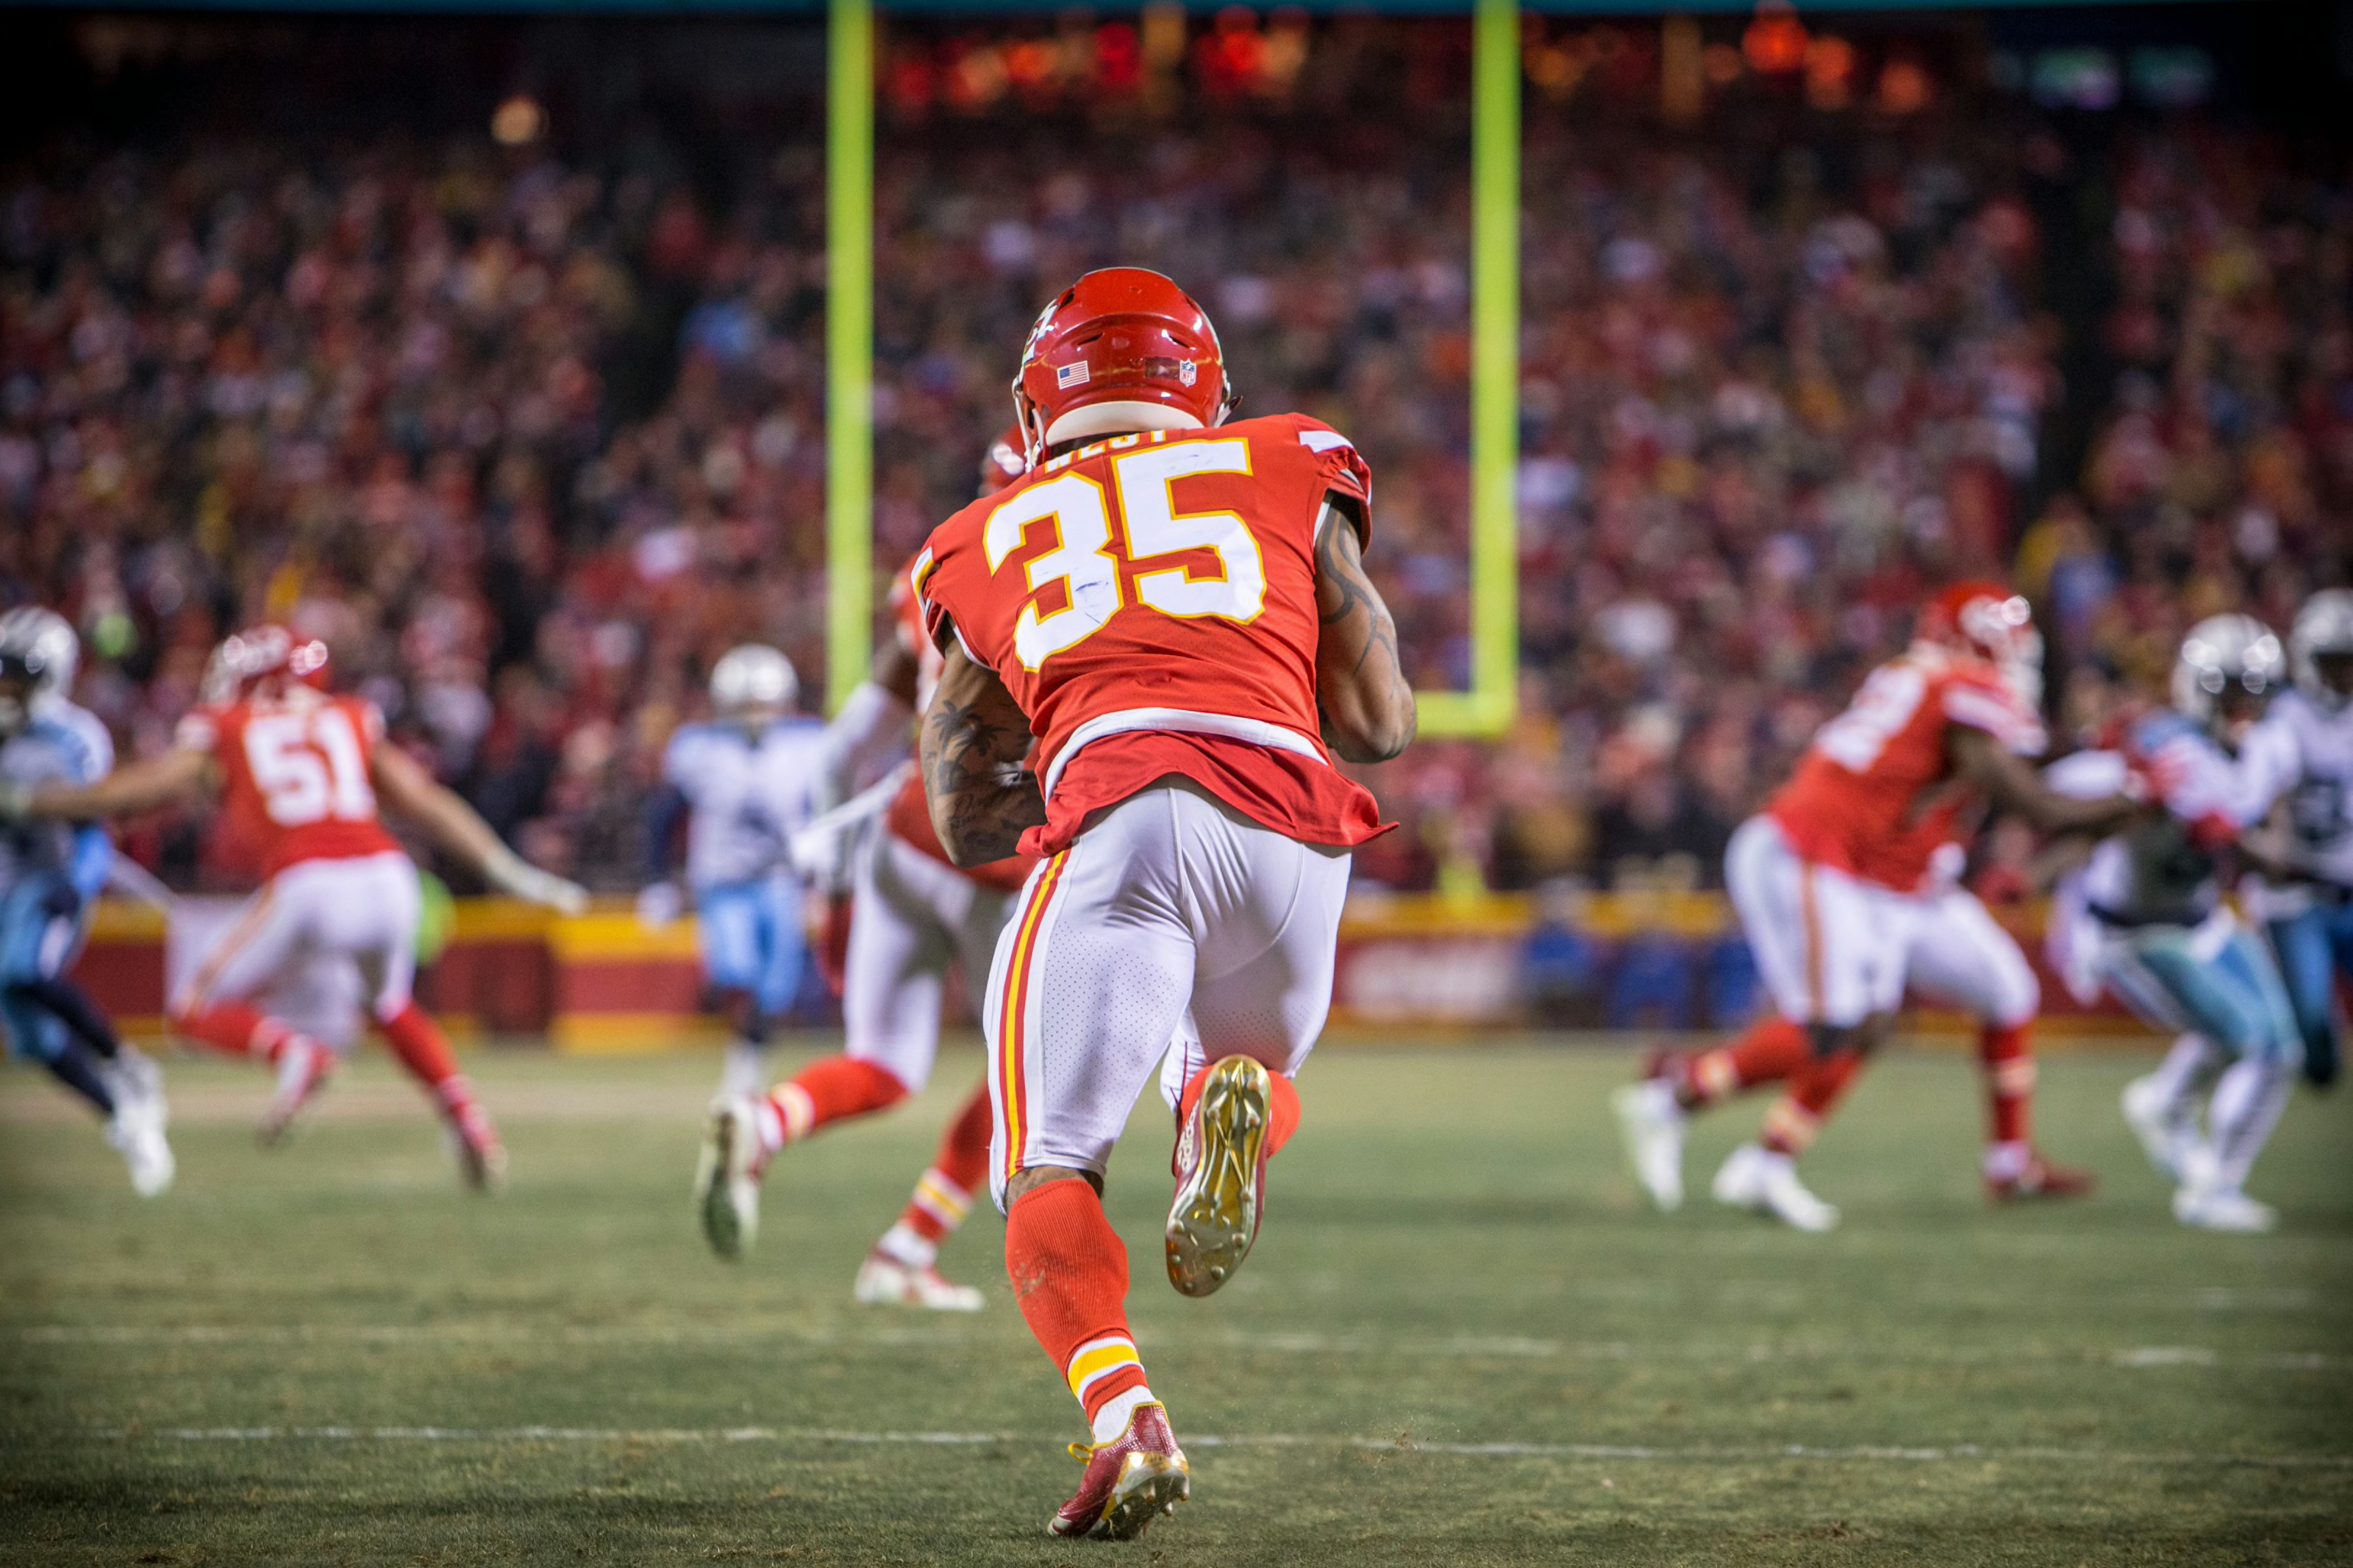 Kansas City Chiefs: Running backs will have larger role in 2018 - Page 3